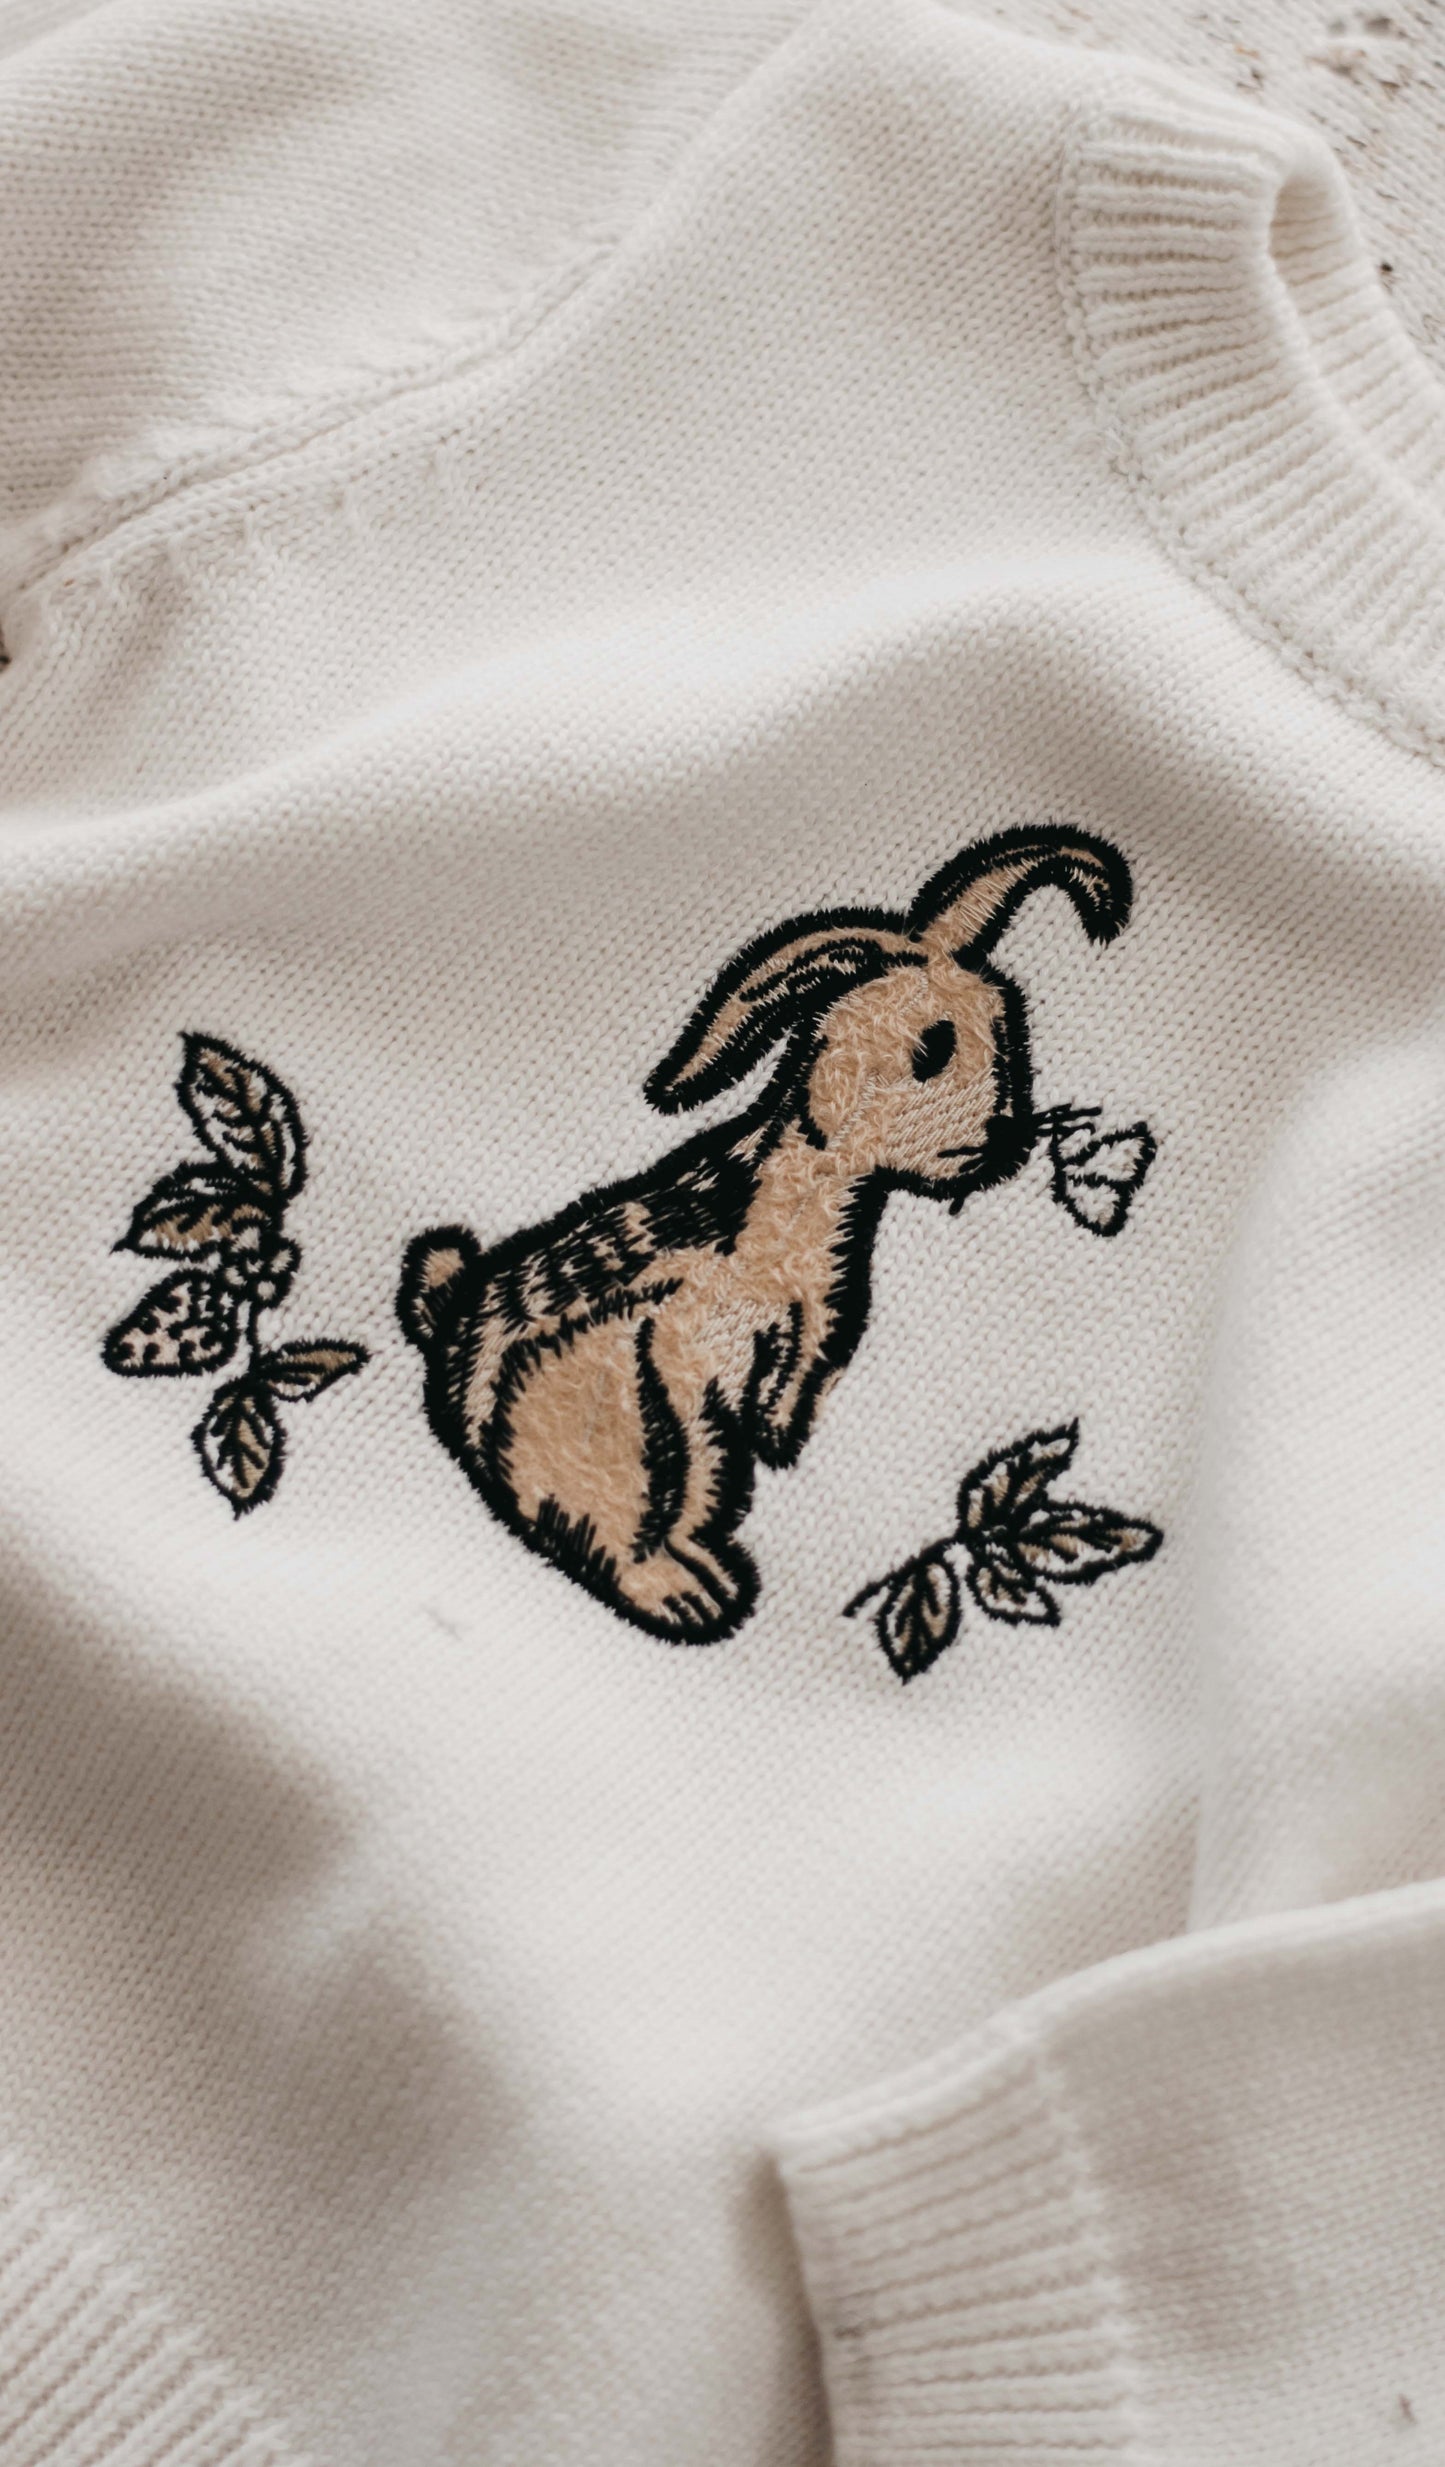 Bencer and Hazelnut Little Bunny Embroidered Knit Jumper - White